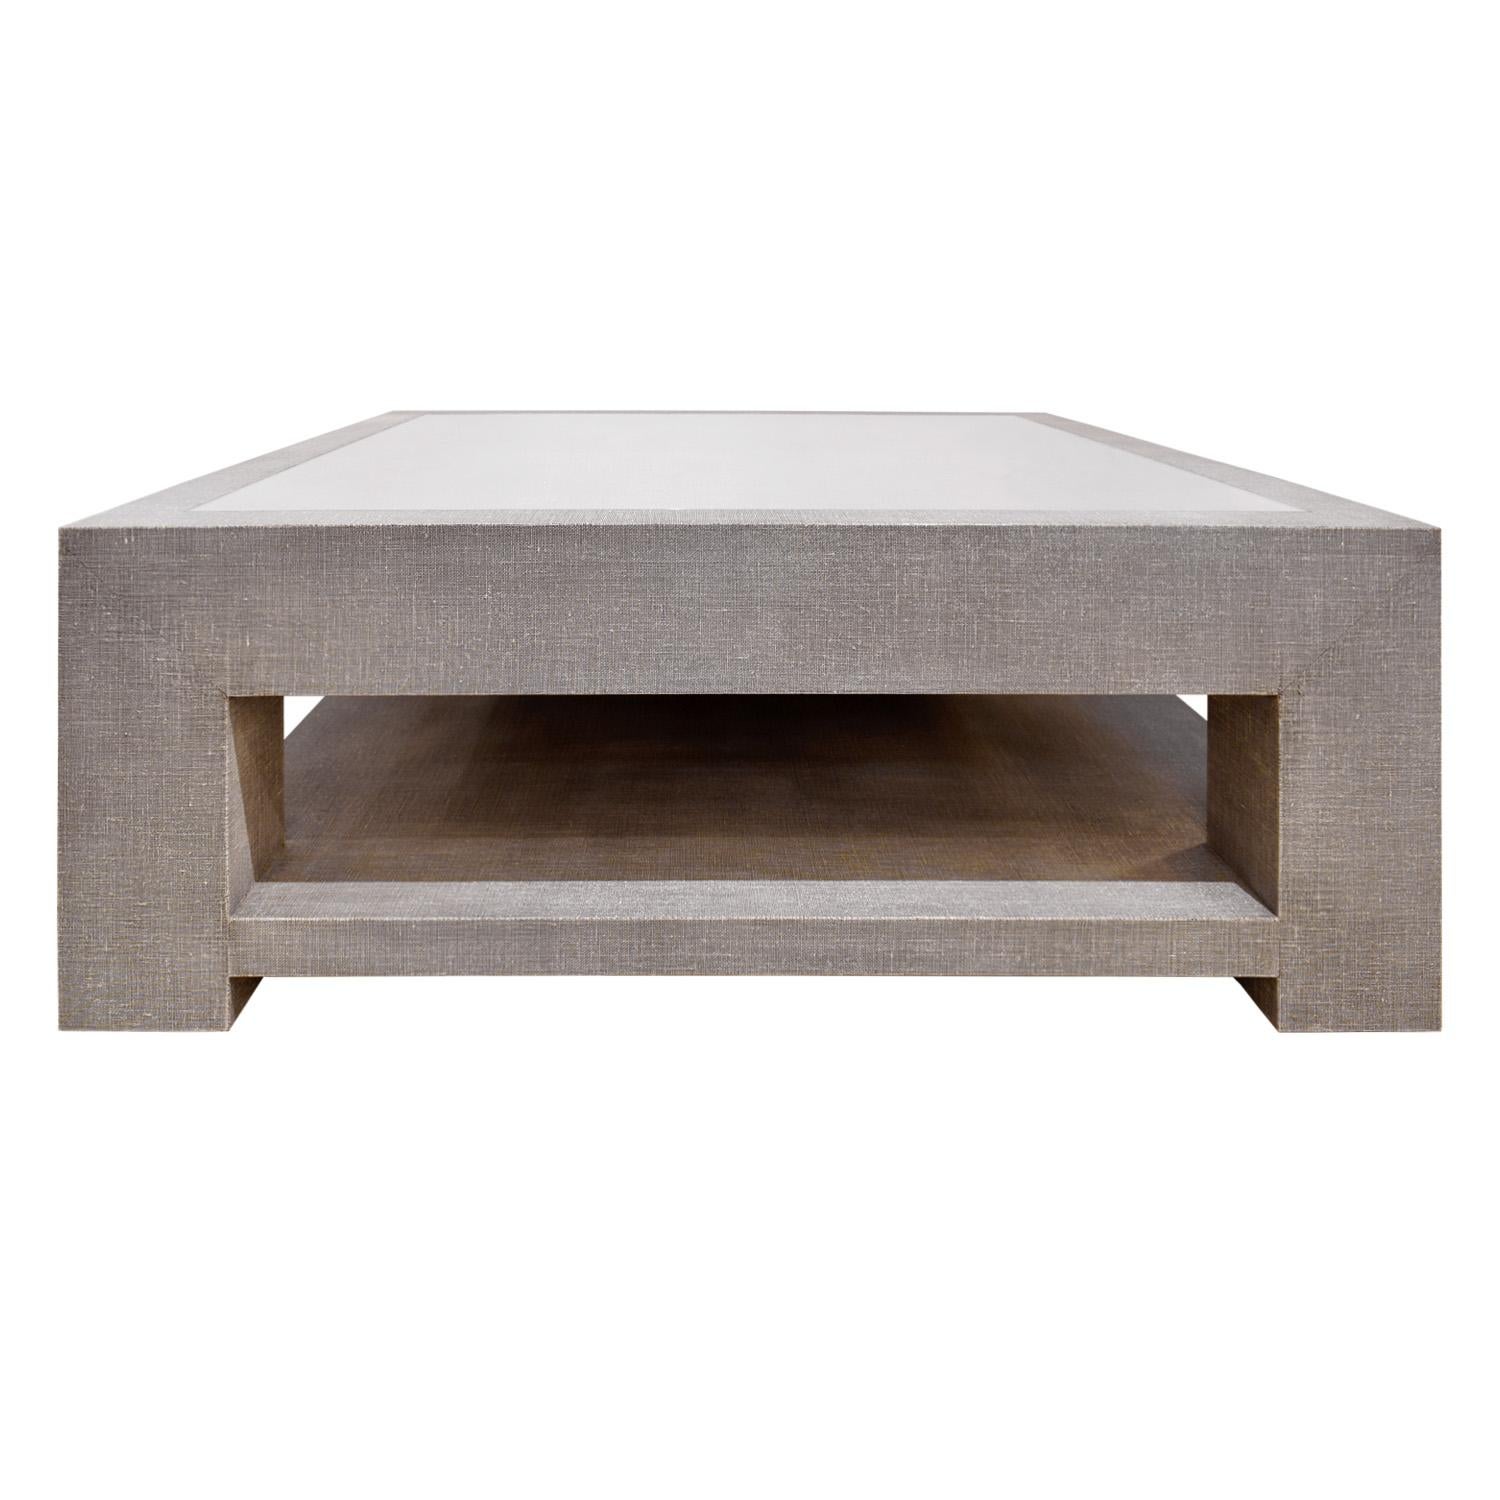 Coffee table model 1020 covered in 2-tone lacquered linen (as shown) with lower shelf and inset Starfire glass top by Evan Lobel for Lobel Originals. This table is made to order. It can be made in any color and in any size and covered in lacquered